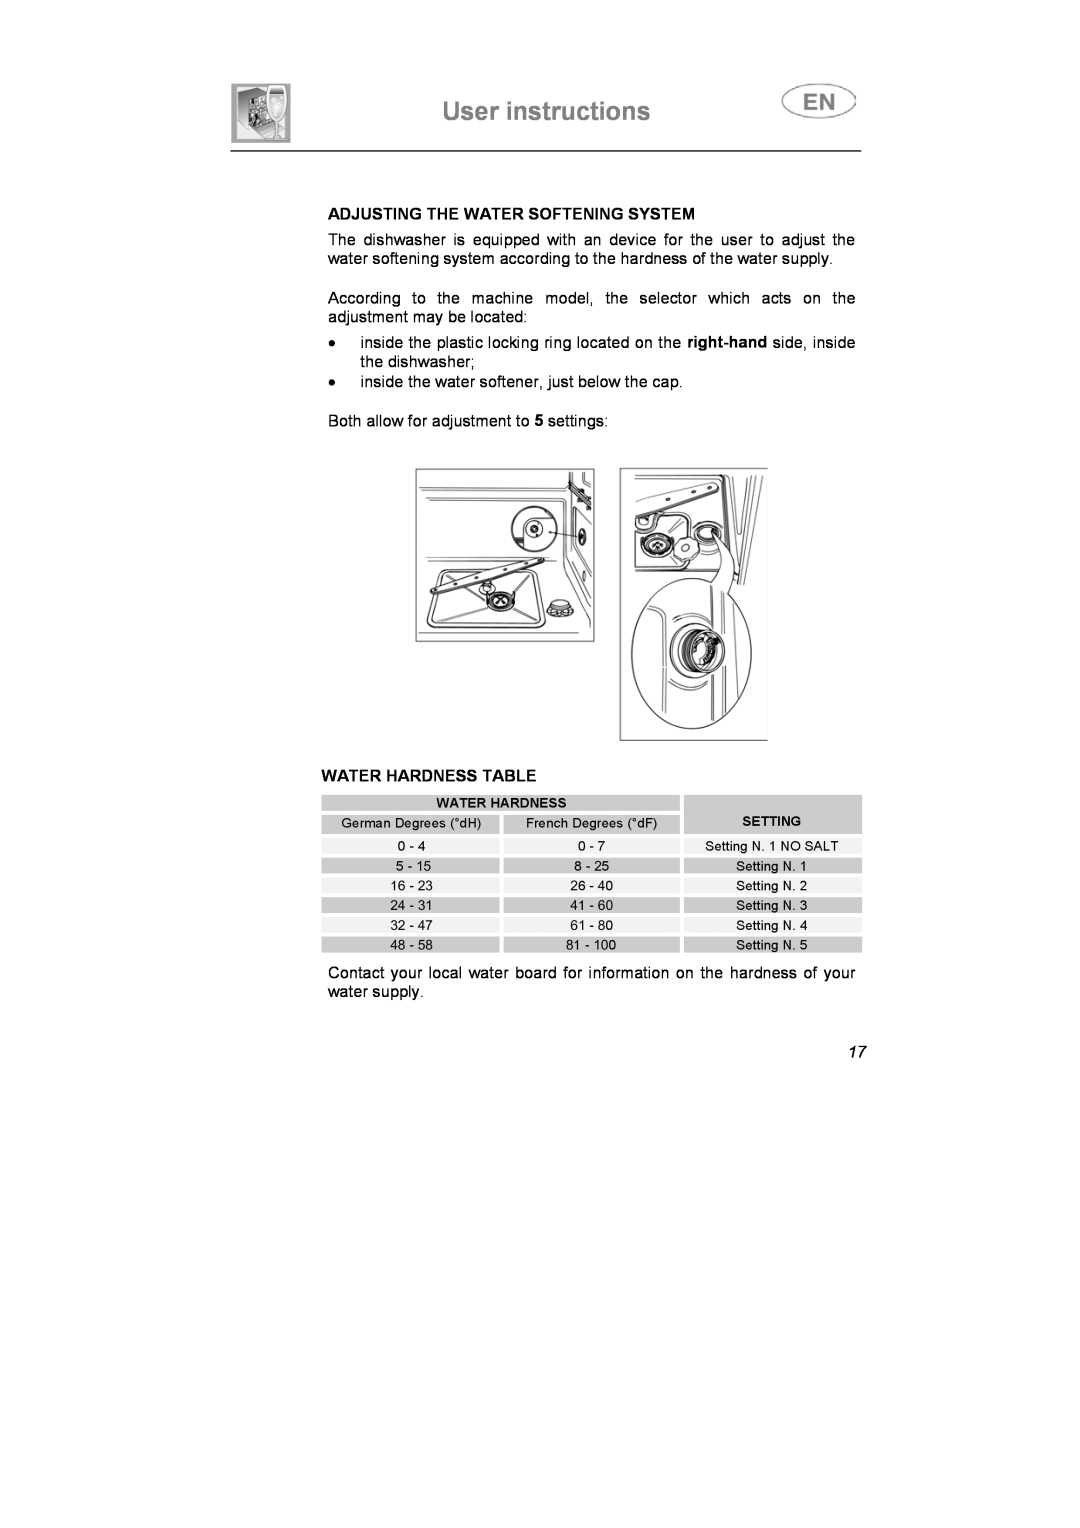 Smeg LSA6051B instruction manual Adjusting The Water Softening System, Water Hardness Table, User instructions 